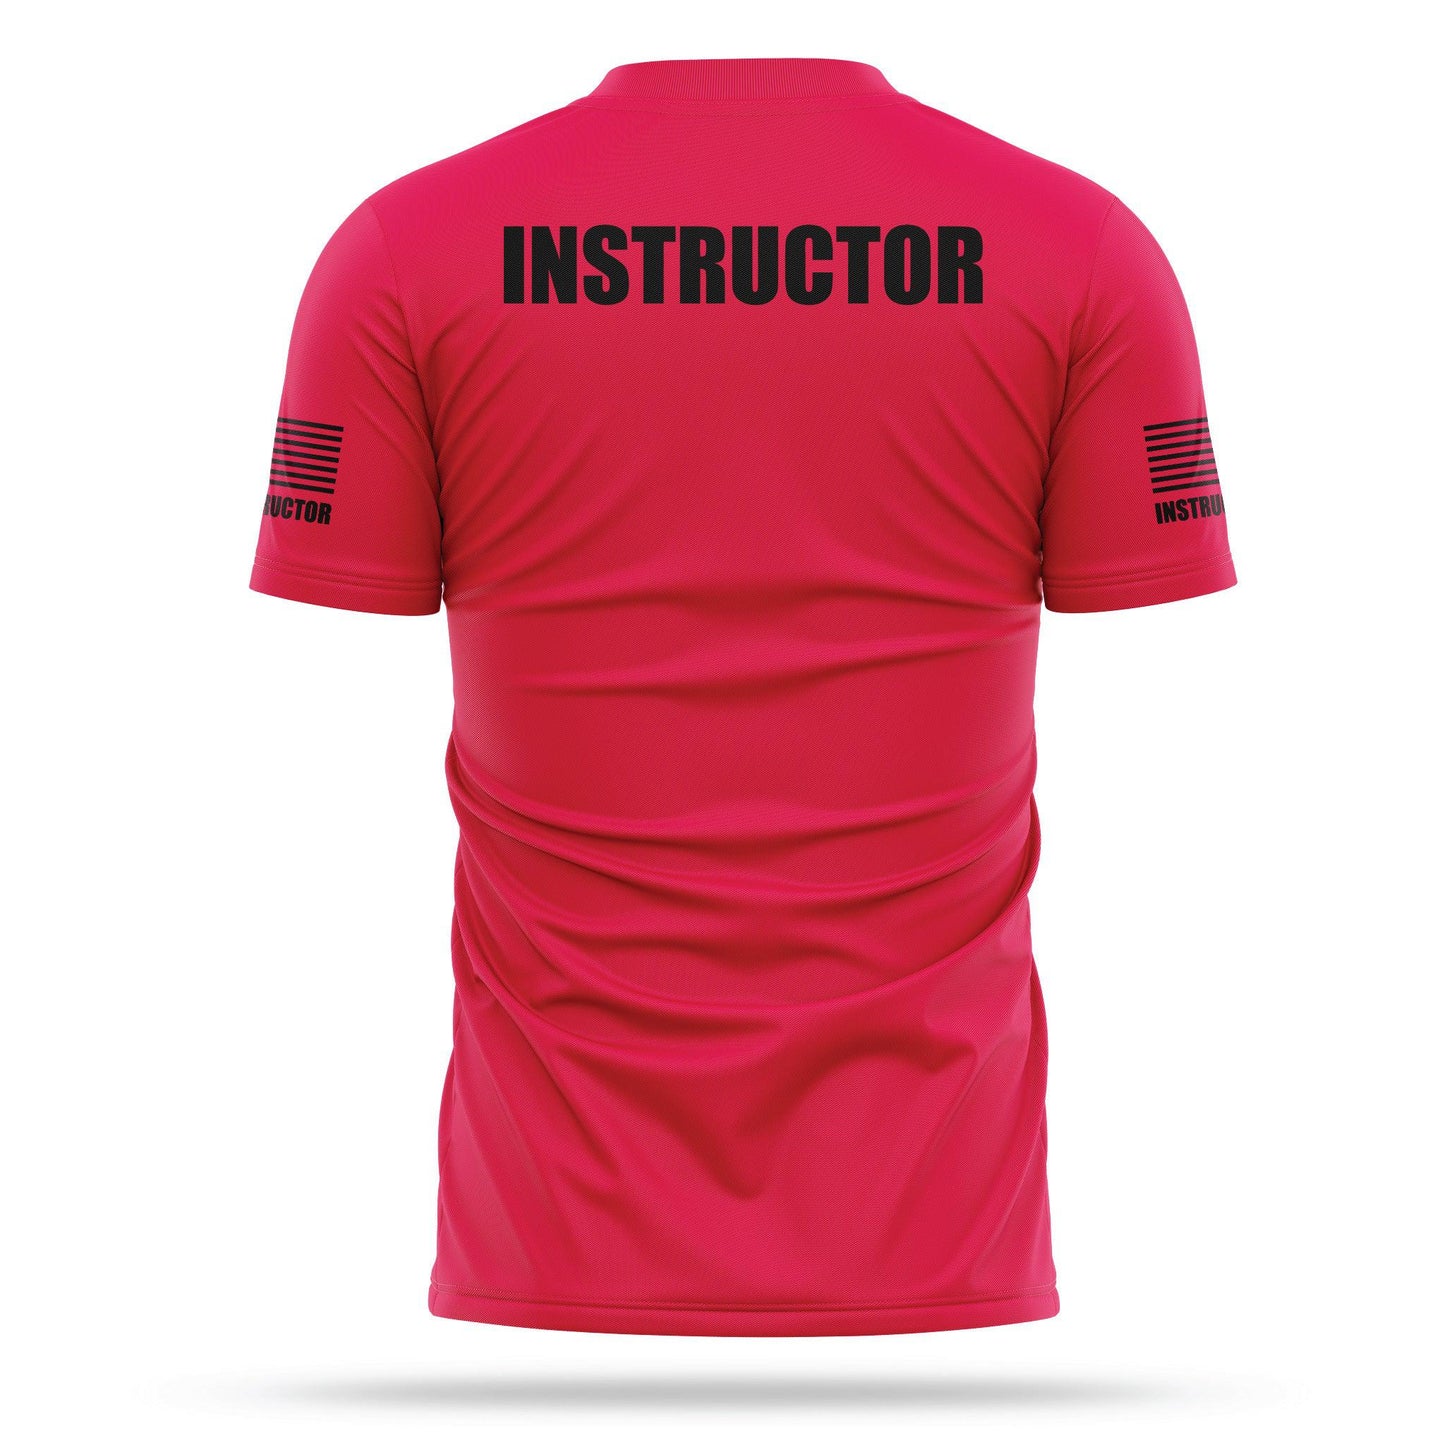 [INSTRUCTOR] Men's Utility Shirt [RED/BLK]-13 Fifty Apparel